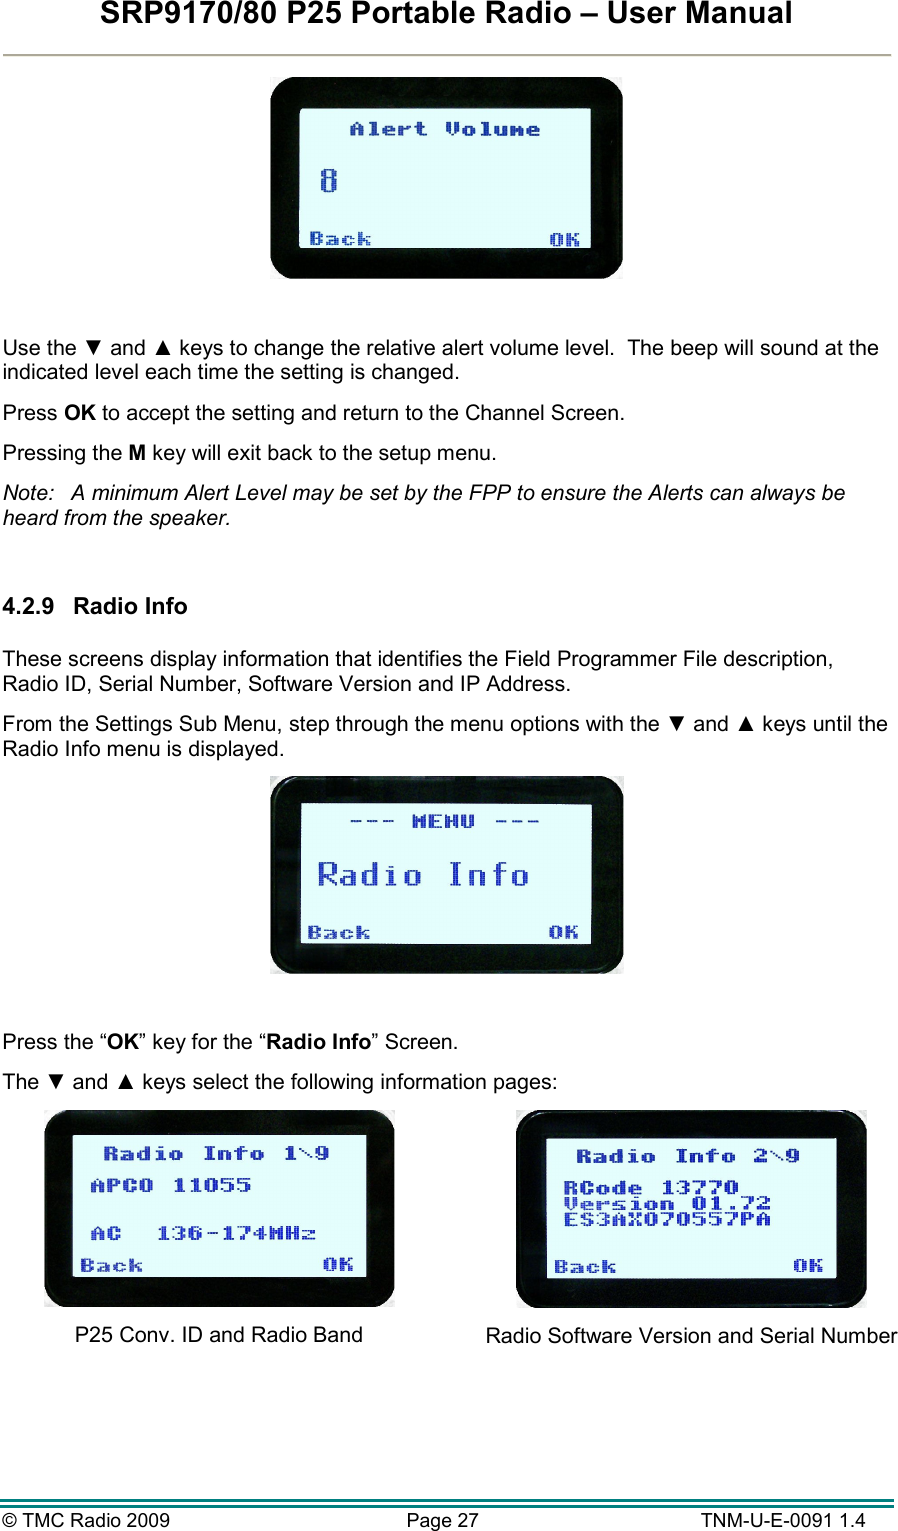 SRP9170/80 P25 Portable Radio – User Manual  © TMC Radio 2009  Page 27   TNM-U-E-0091 1.4   Use the ▼ and ▲ keys to change the relative alert volume level.  The beep will sound at the indicated level each time the setting is changed. Press OK to accept the setting and return to the Channel Screen. Pressing the M key will exit back to the setup menu. Note:  A minimum Alert Level may be set by the FPP to ensure the Alerts can always be heard from the speaker.  4.2.9  Radio Info  These screens display information that identifies the Field Programmer File description, Radio ID, Serial Number, Software Version and IP Address. From the Settings Sub Menu, step through the menu options with the ▼ and ▲ keys until the Radio Info menu is displayed.   Press the “OK” key for the “Radio Info” Screen. The ▼ and ▲ keys select the following information pages:  P25 Conv. ID and Radio Band   Radio Software Version and Serial Number 